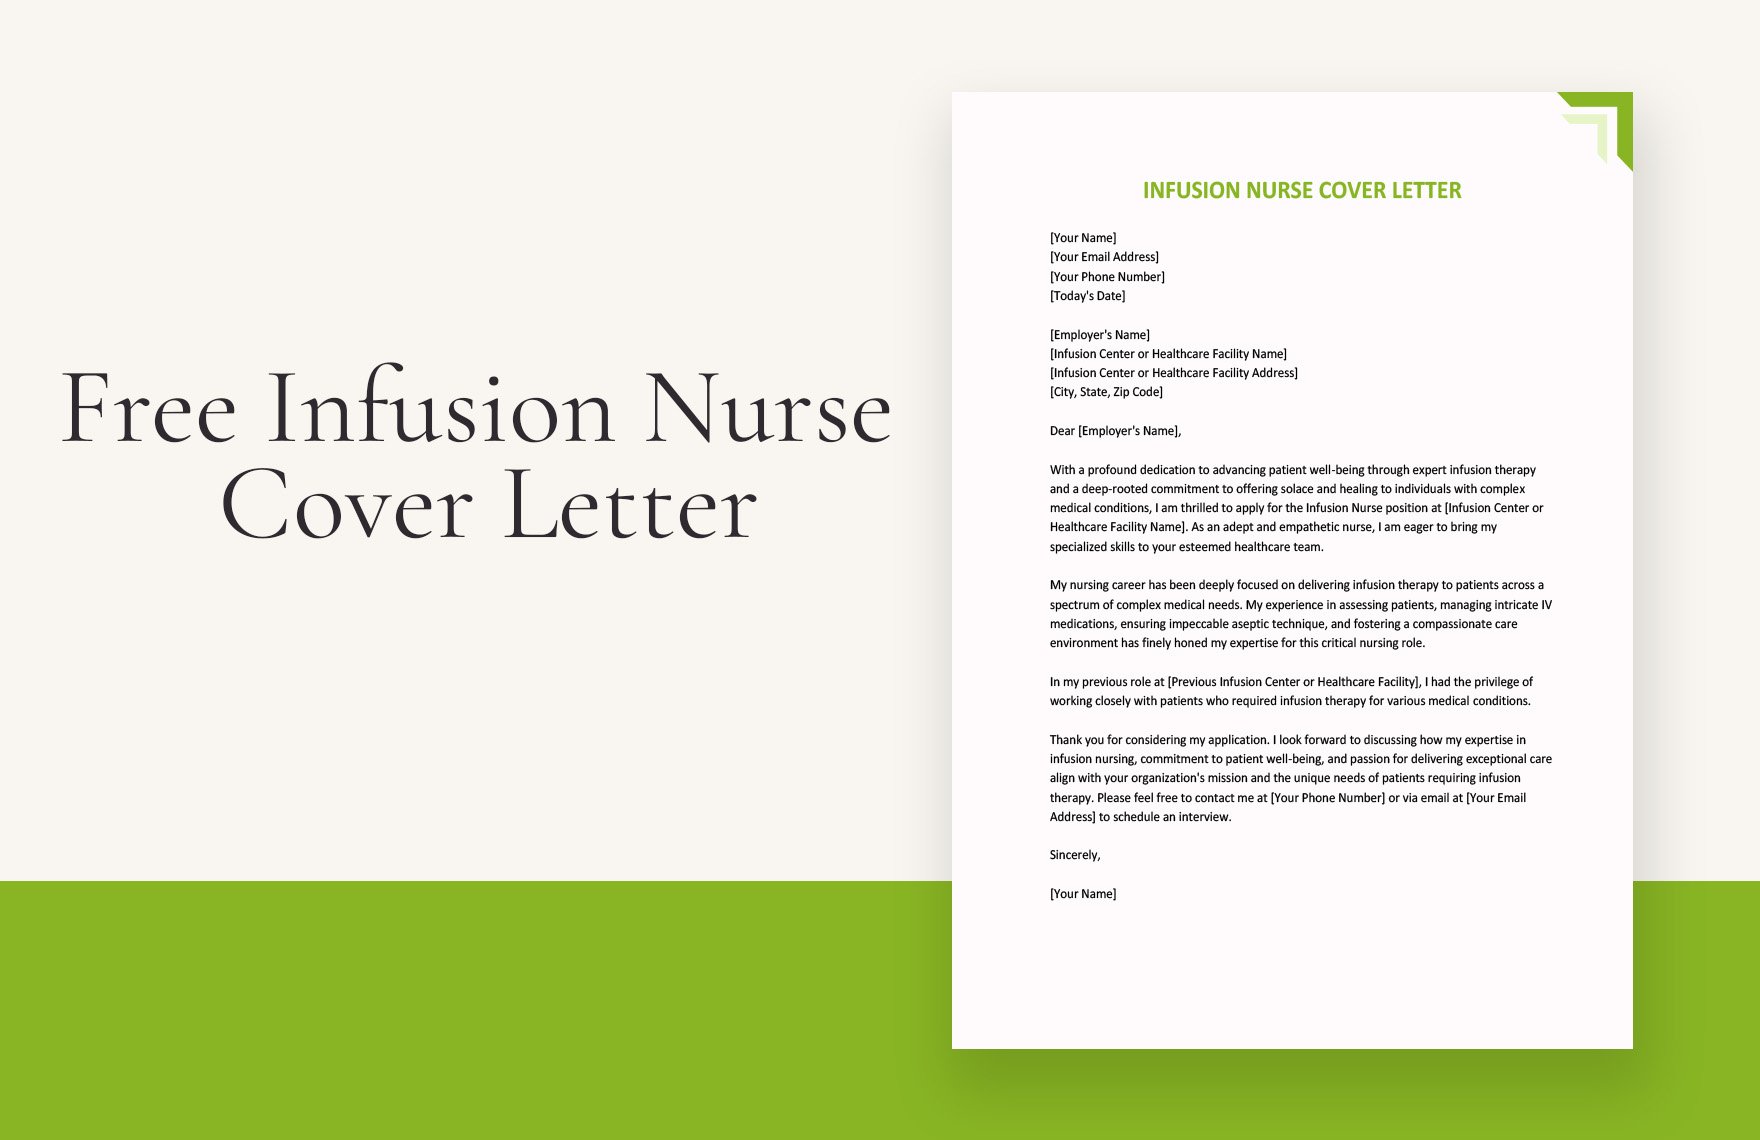 Infusion Nurse Cover Letter in Word, Google Docs